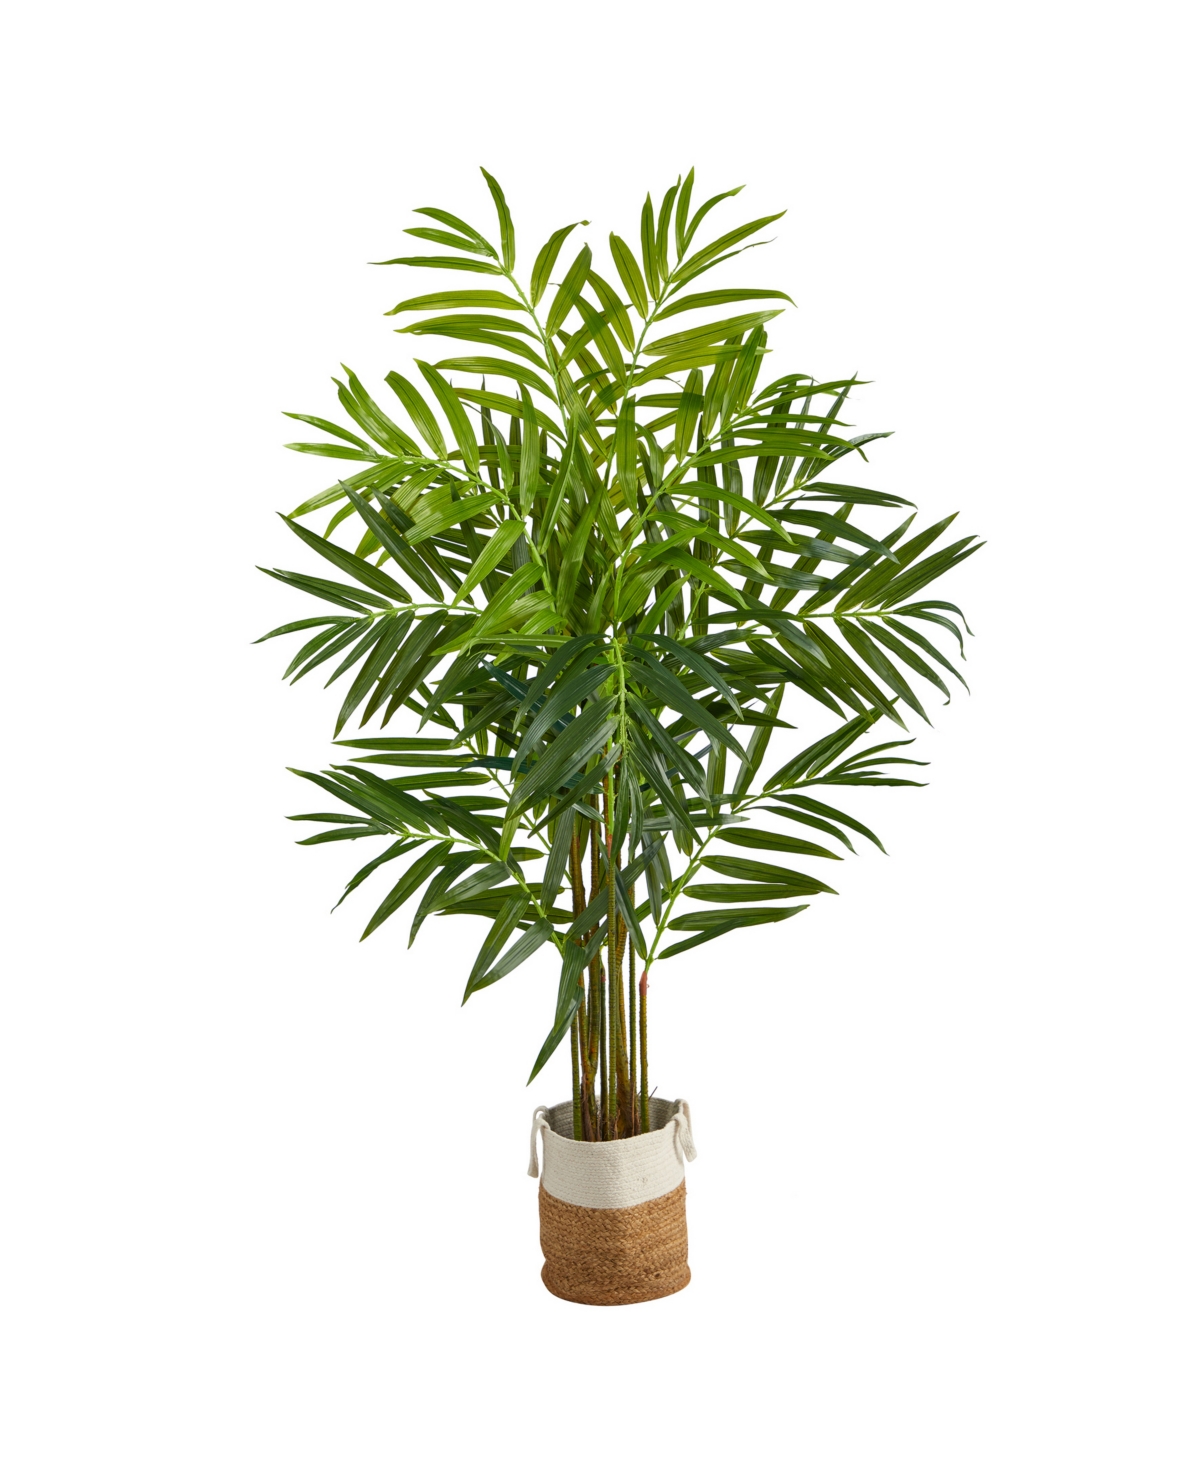 8' King Palm Artificial Tree in Planter - Green